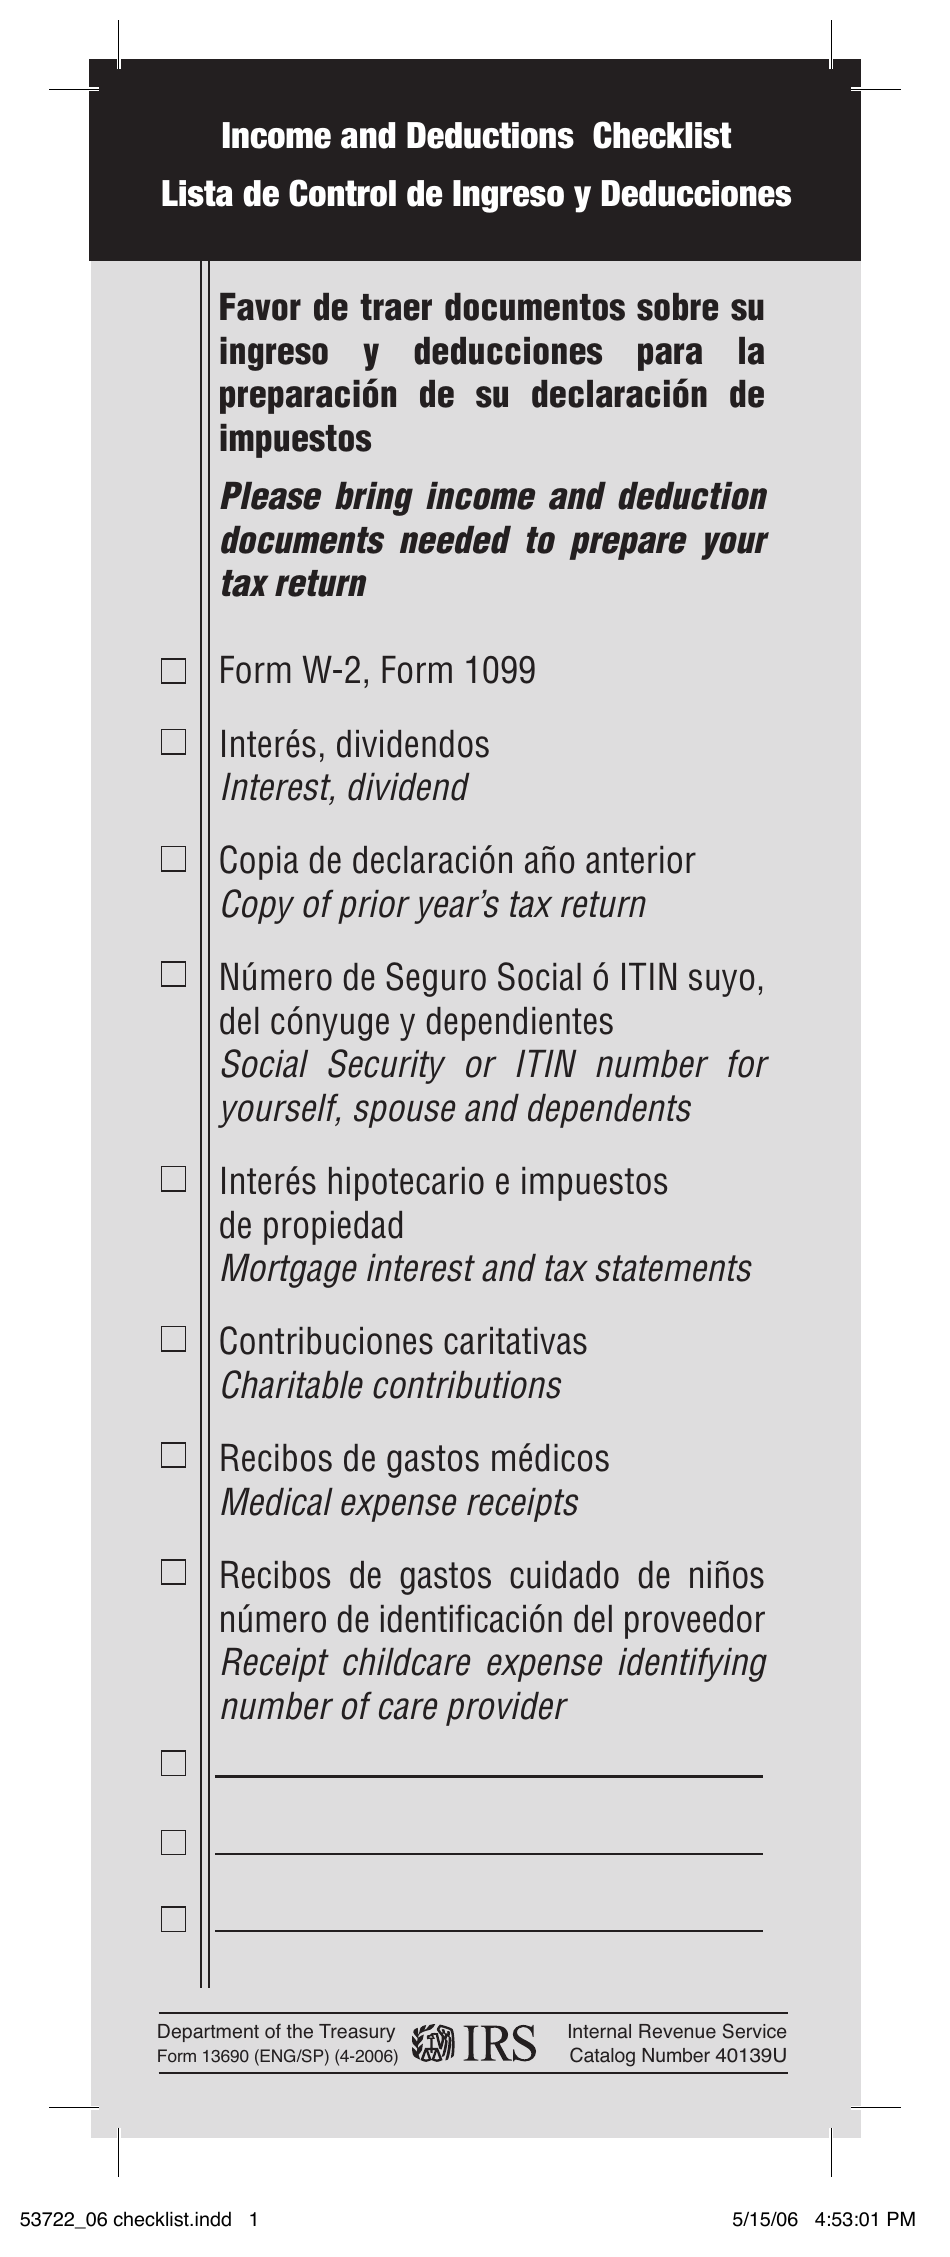 IRS Form 13690 Income and Deductions Checklist (English / Spanish), Page 1